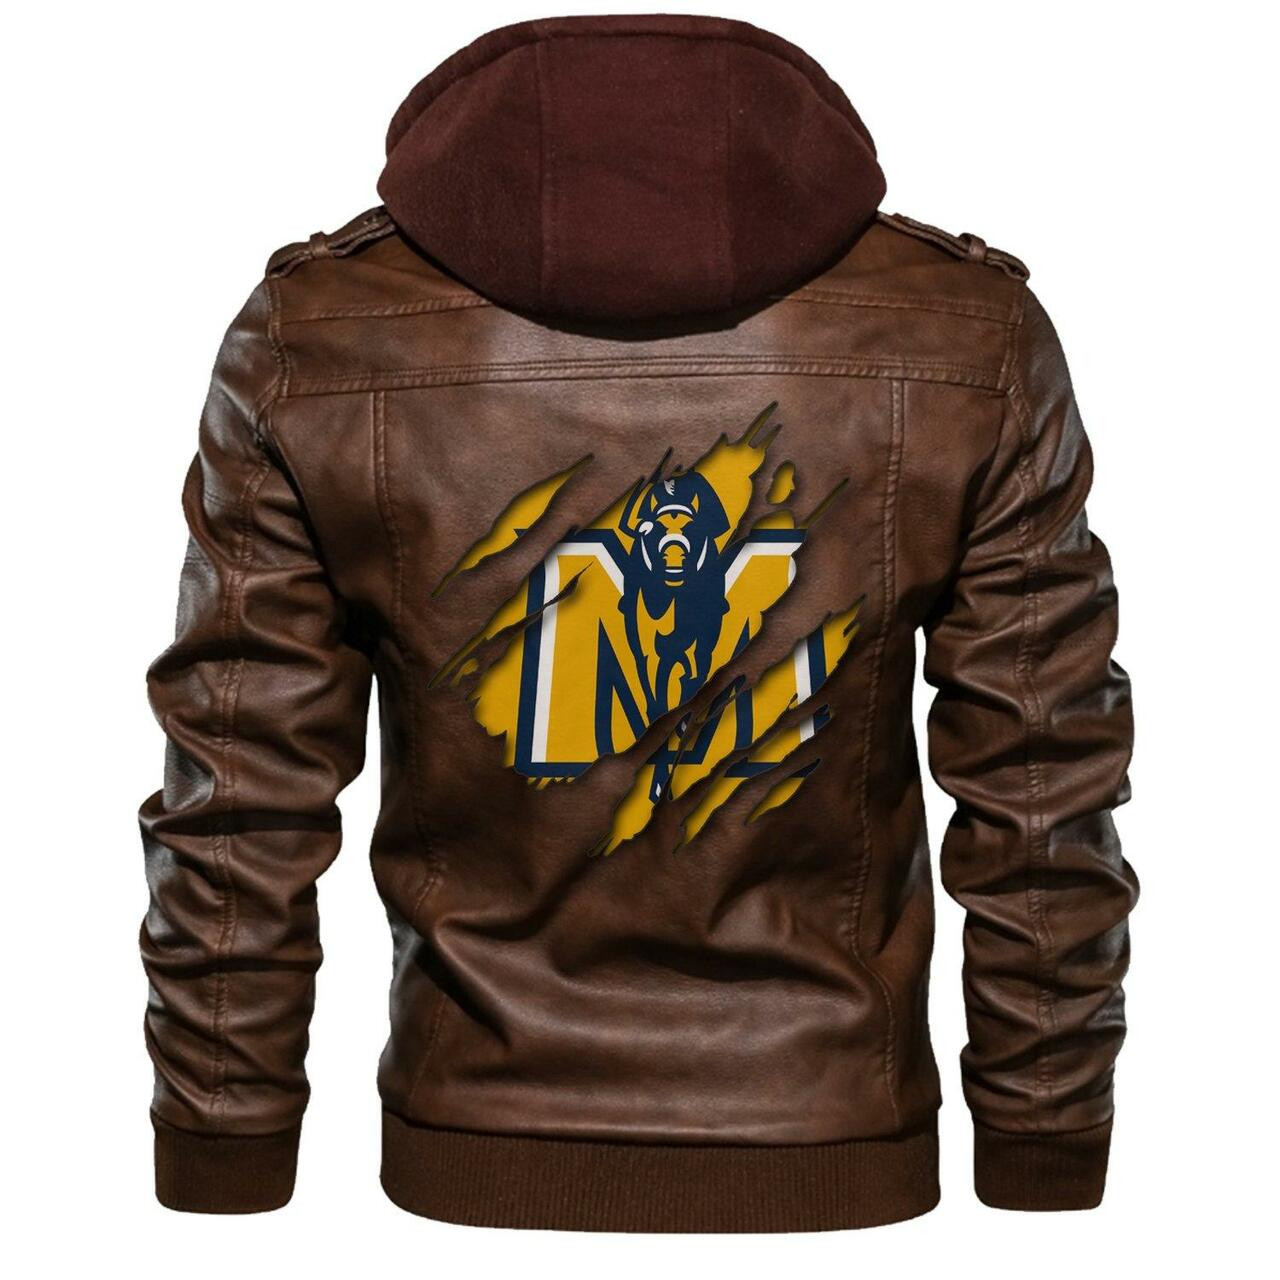 You'll have the perfect jacket in no time by clicking the link below 73